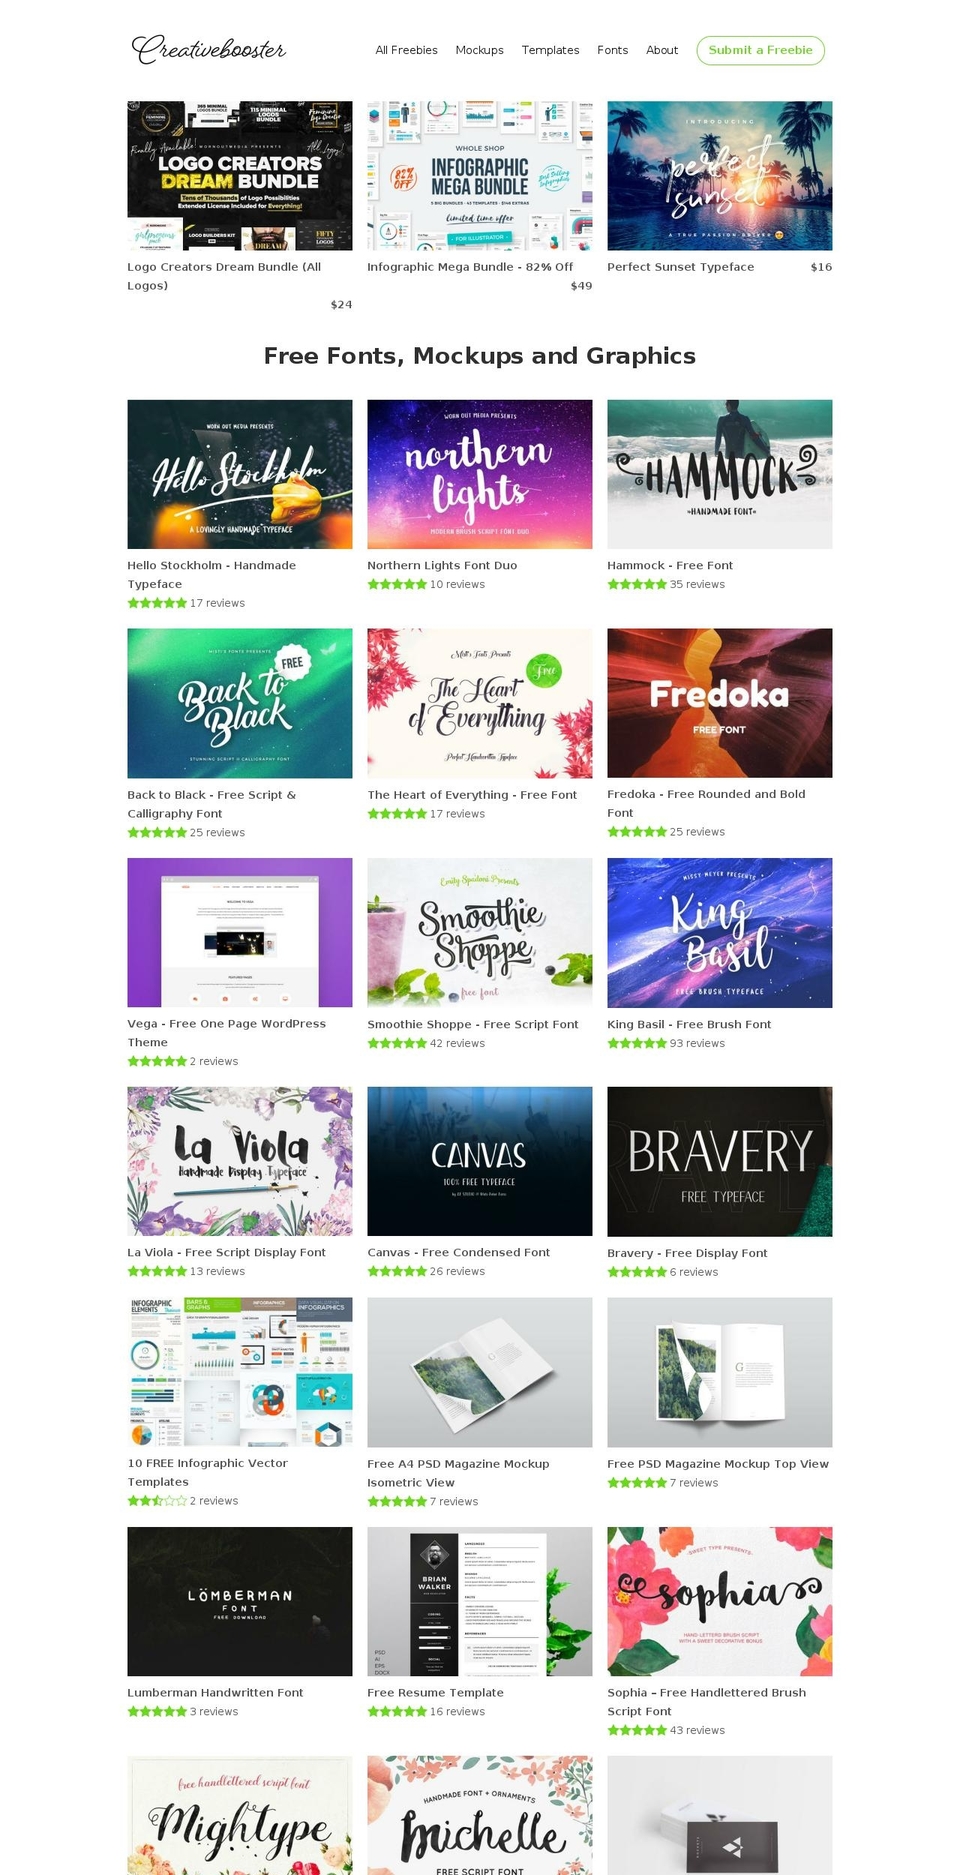 Dawn Shopify theme site example creativebooster.net